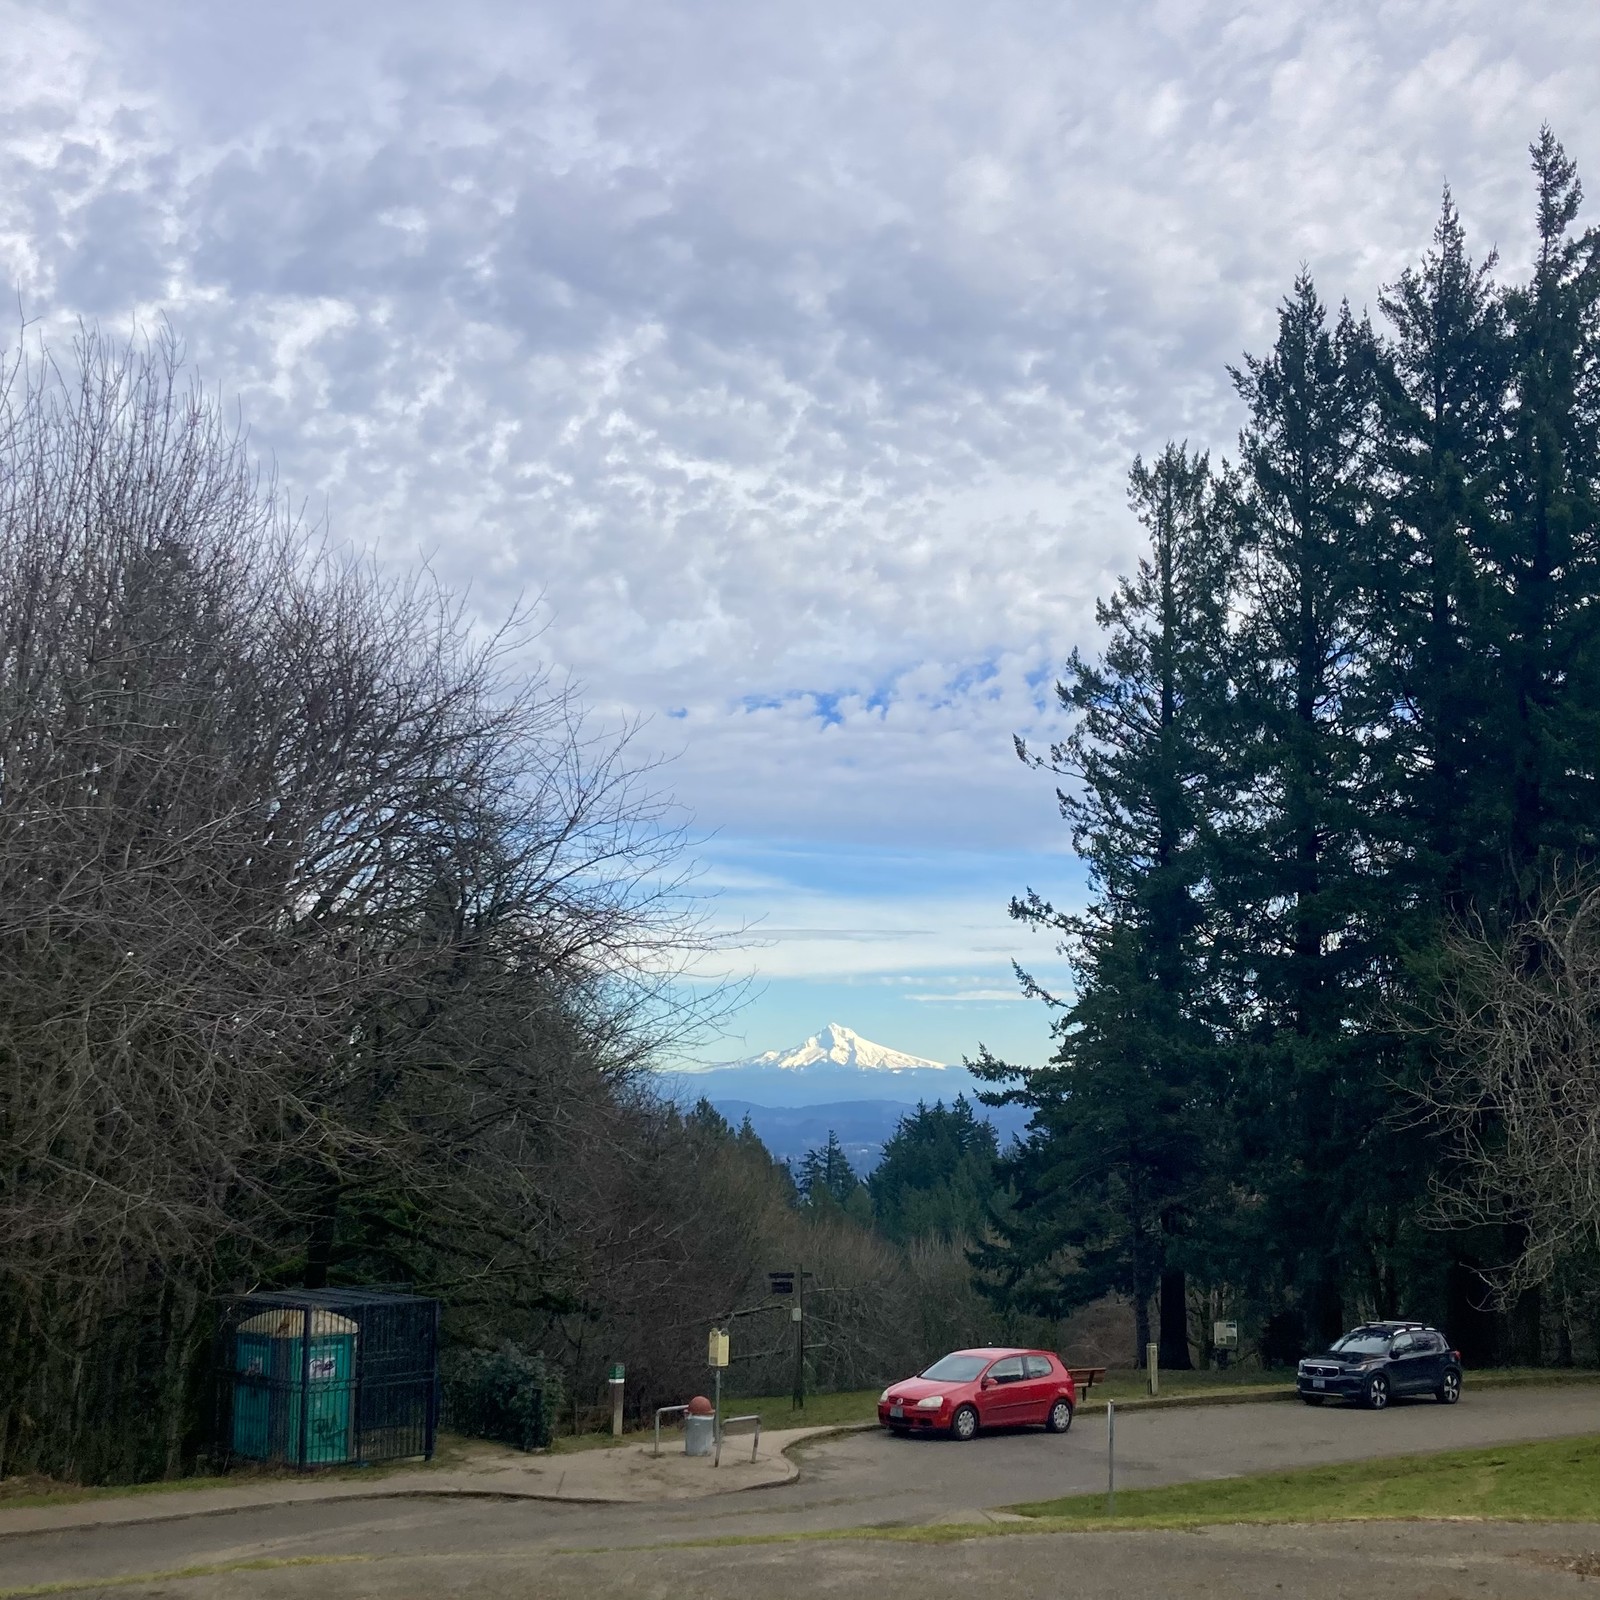 On the horizon, Mt. Hood glows with fresh snow under a blue sky. Overhead a layer of bumpy stratus clouds marches slowly northeastward. In the near foreground is a bright red subcompact and a portapotty